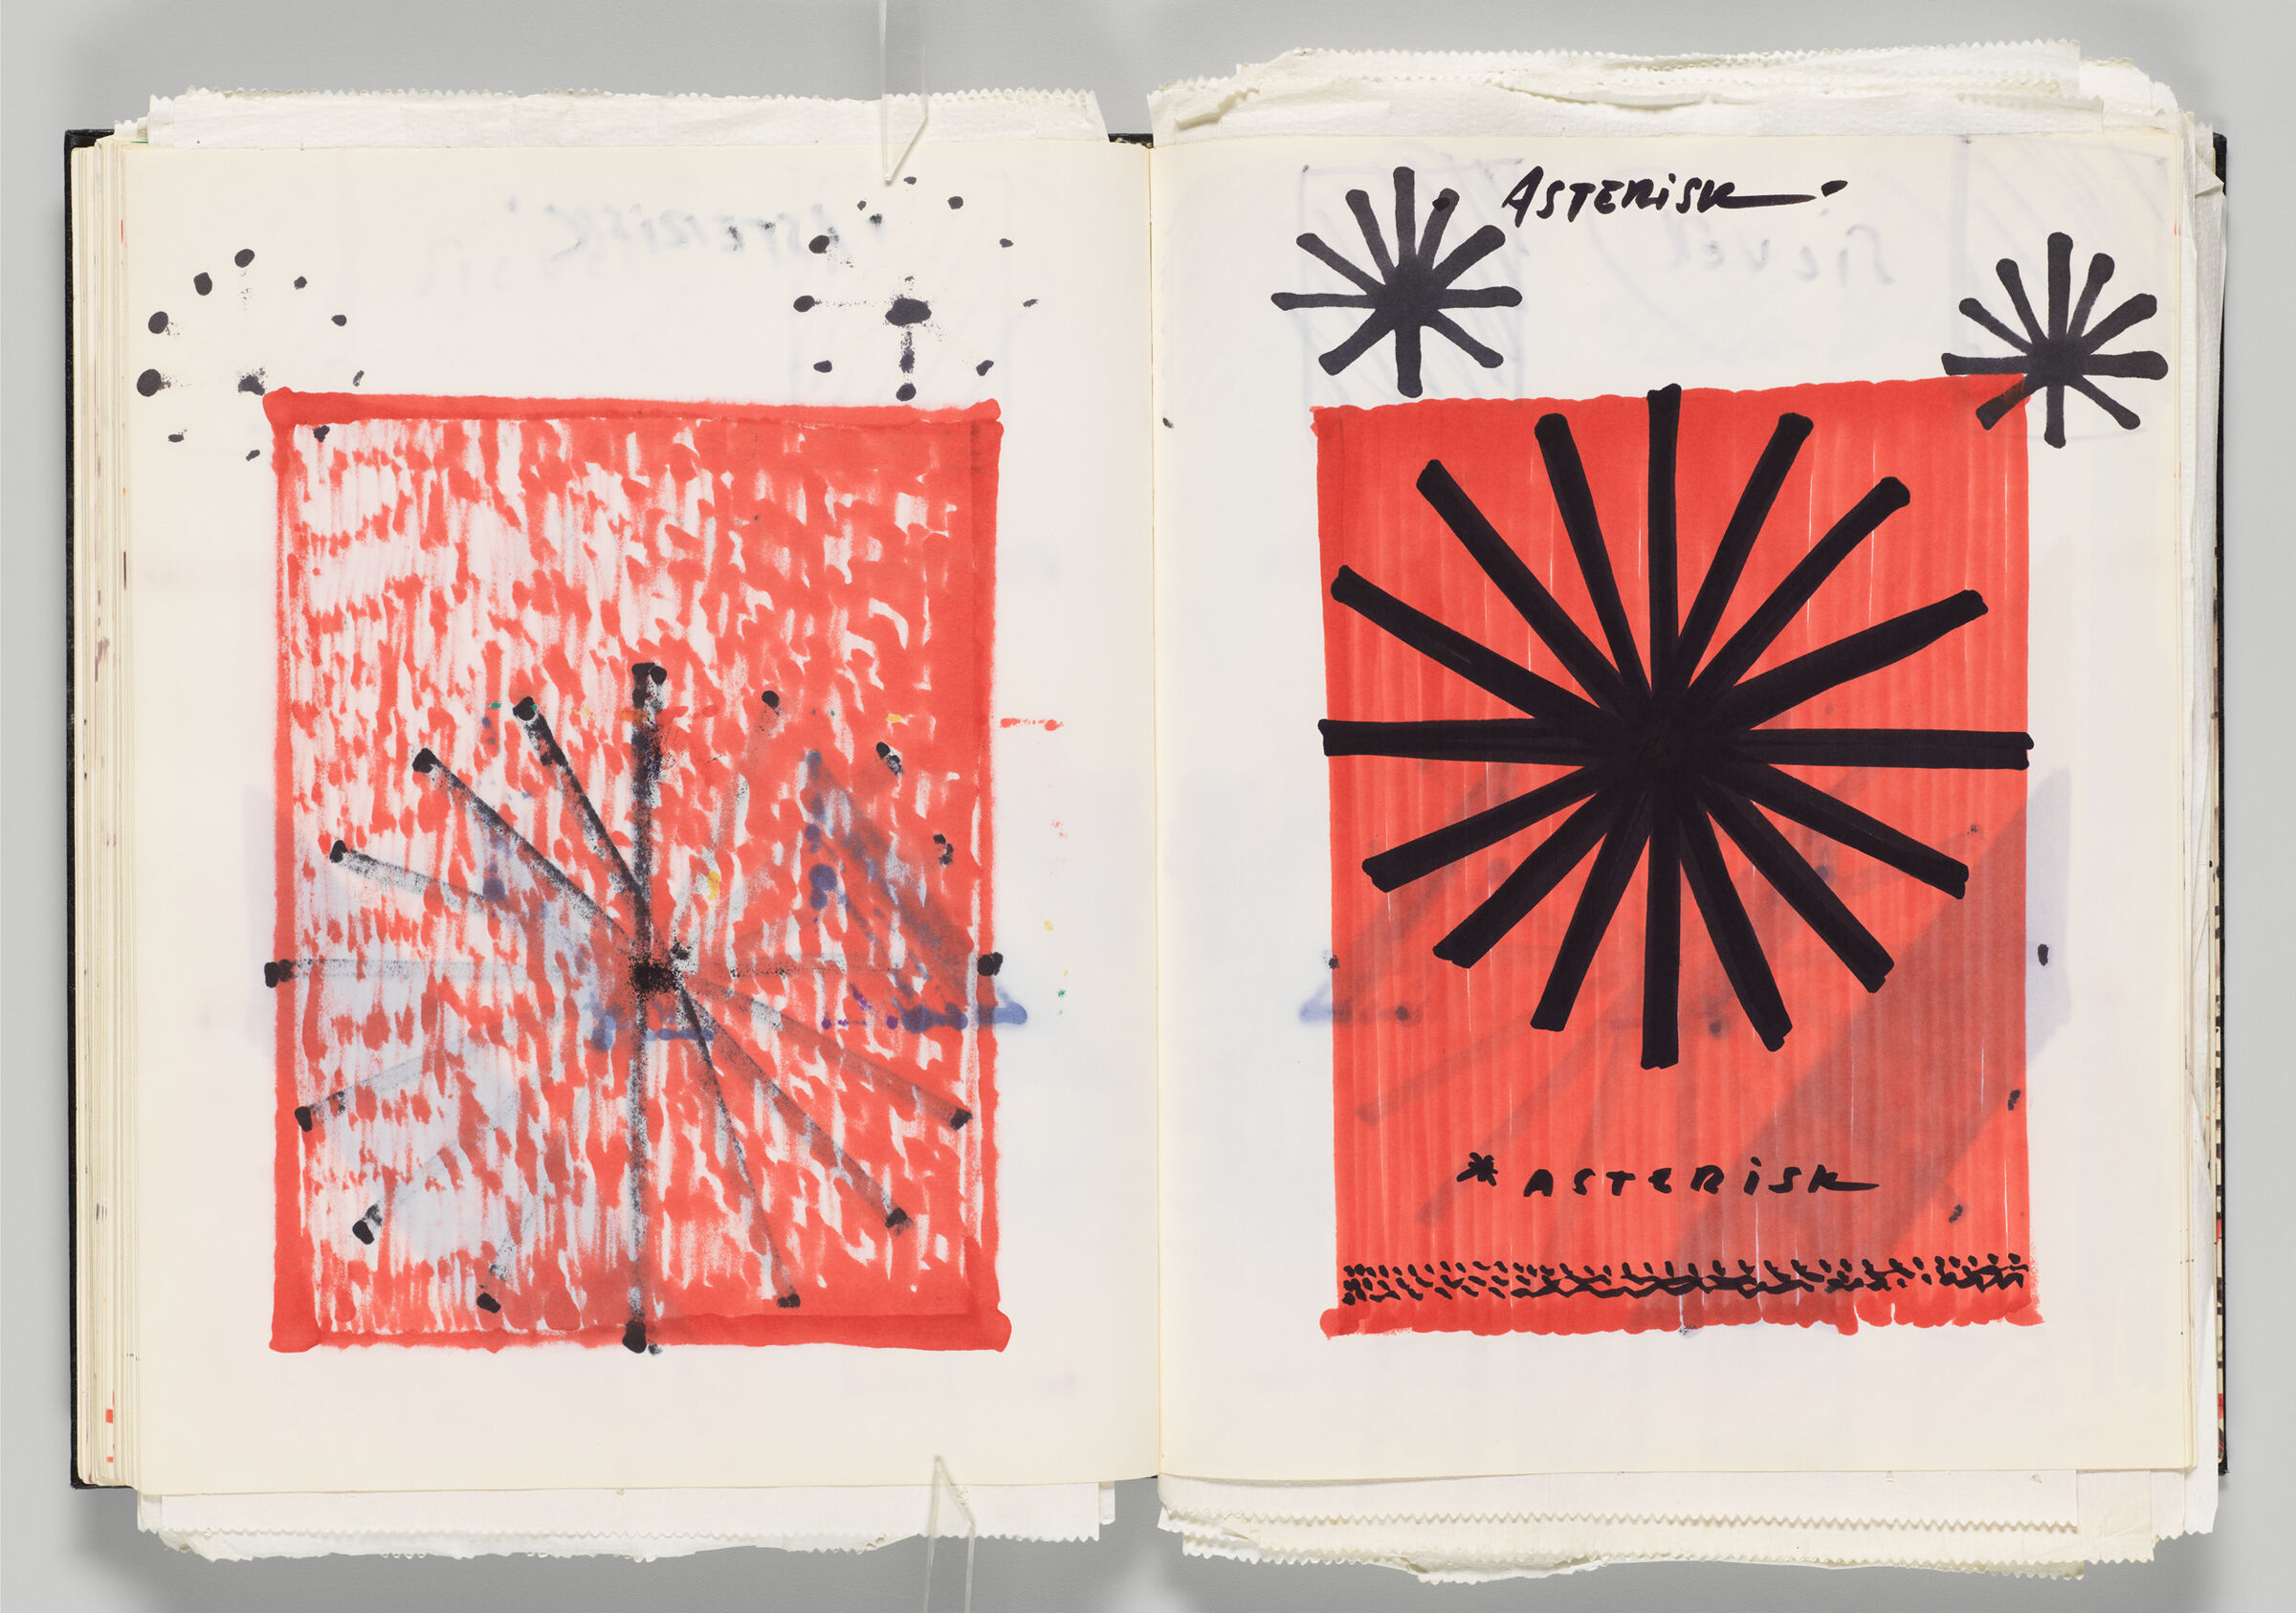 Untitled (Bleed-Through Of Previous Page, Left Page); Untitled (C.a.v.s. Poster Design, Right Page)